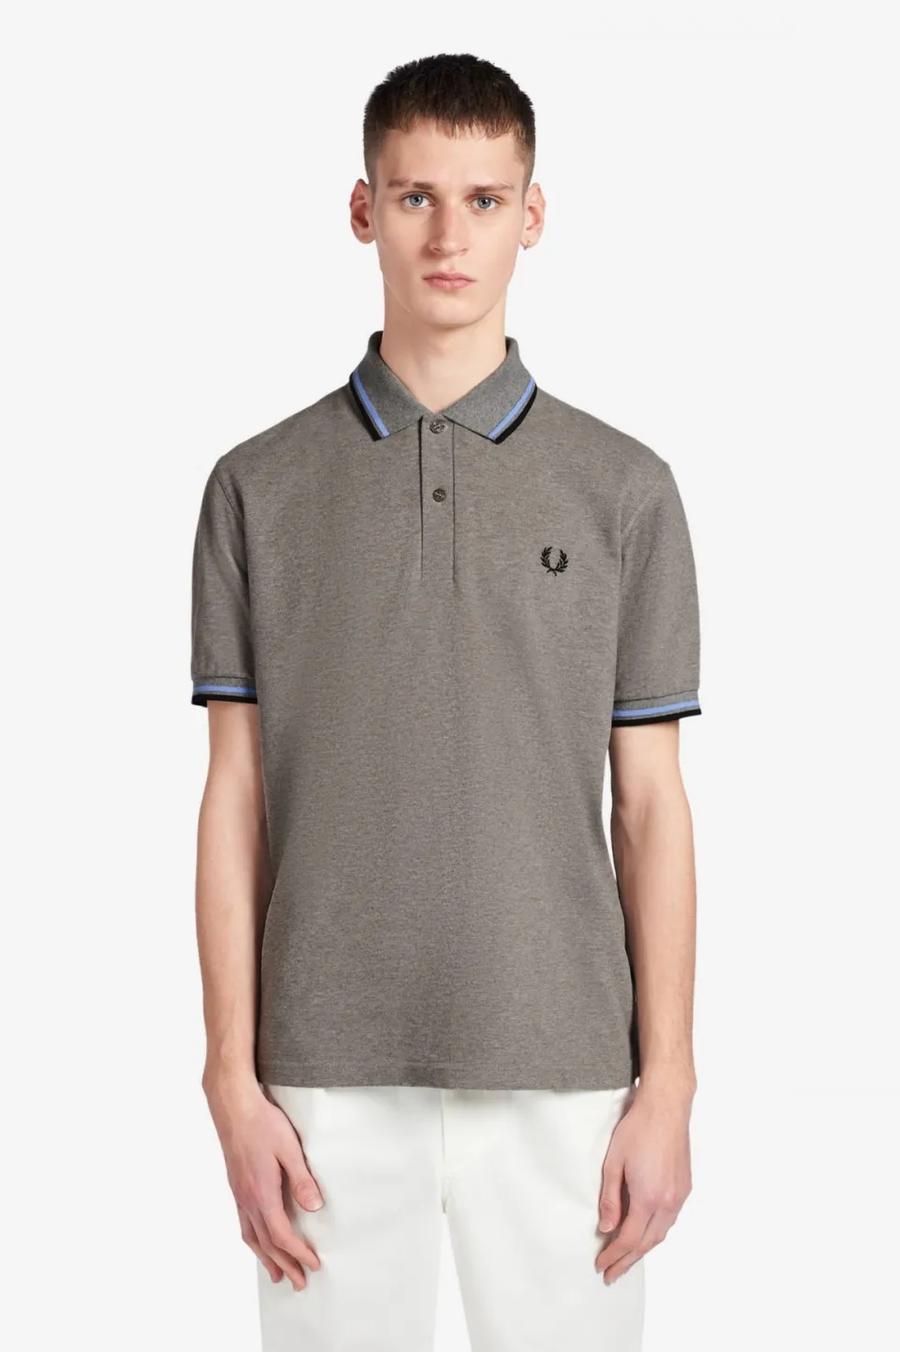 fredperrypolo
